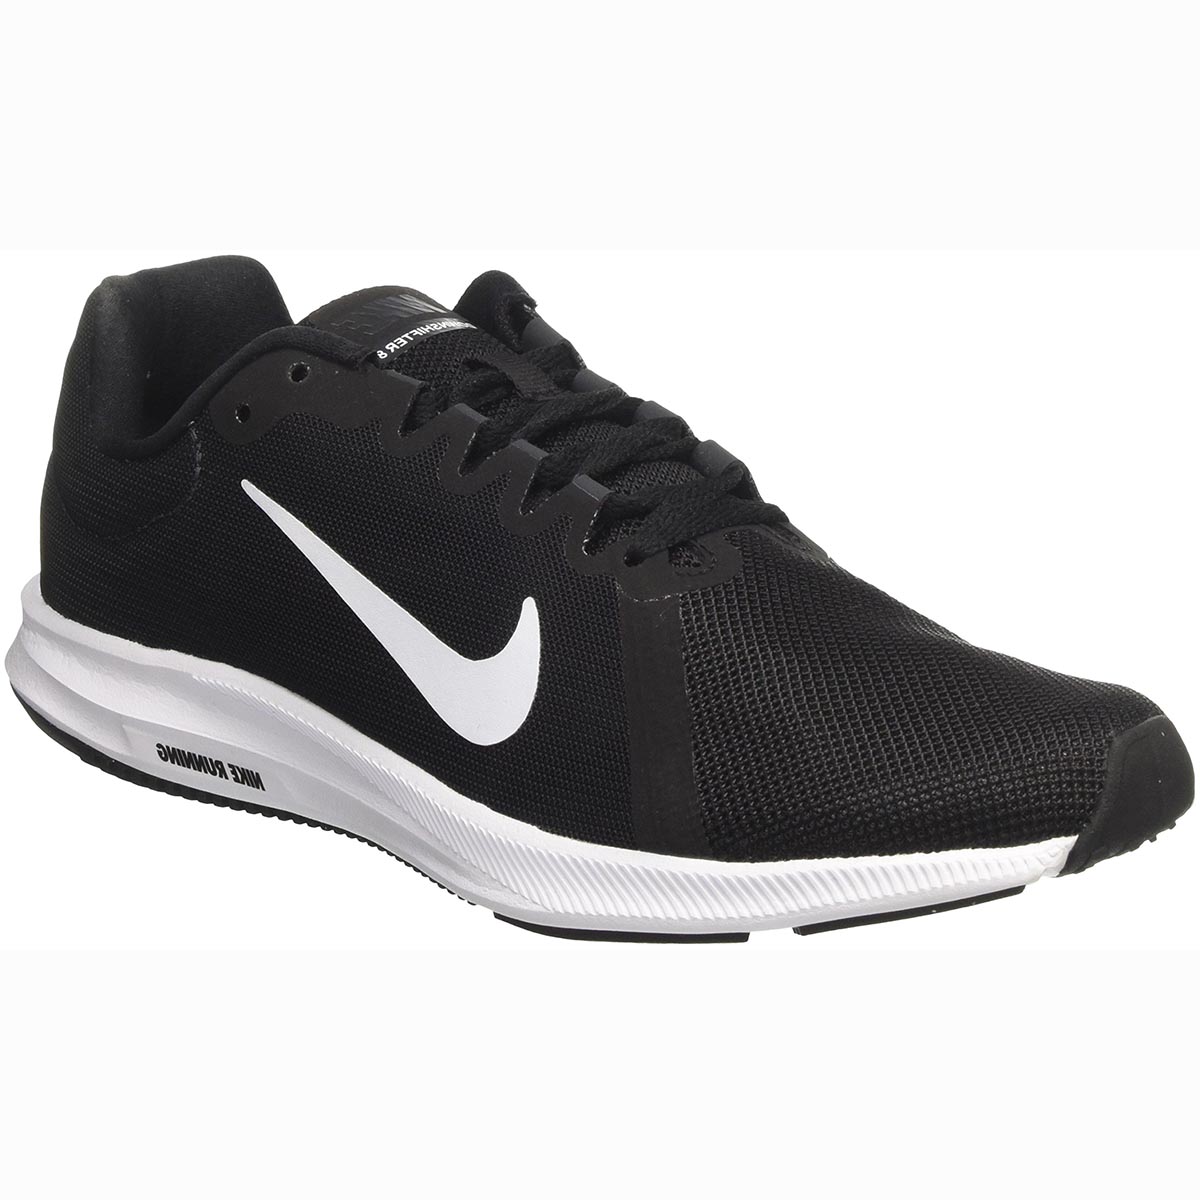 Nike Downshifter 8 Running Shoes (Black/White/Athracte) Online at ...